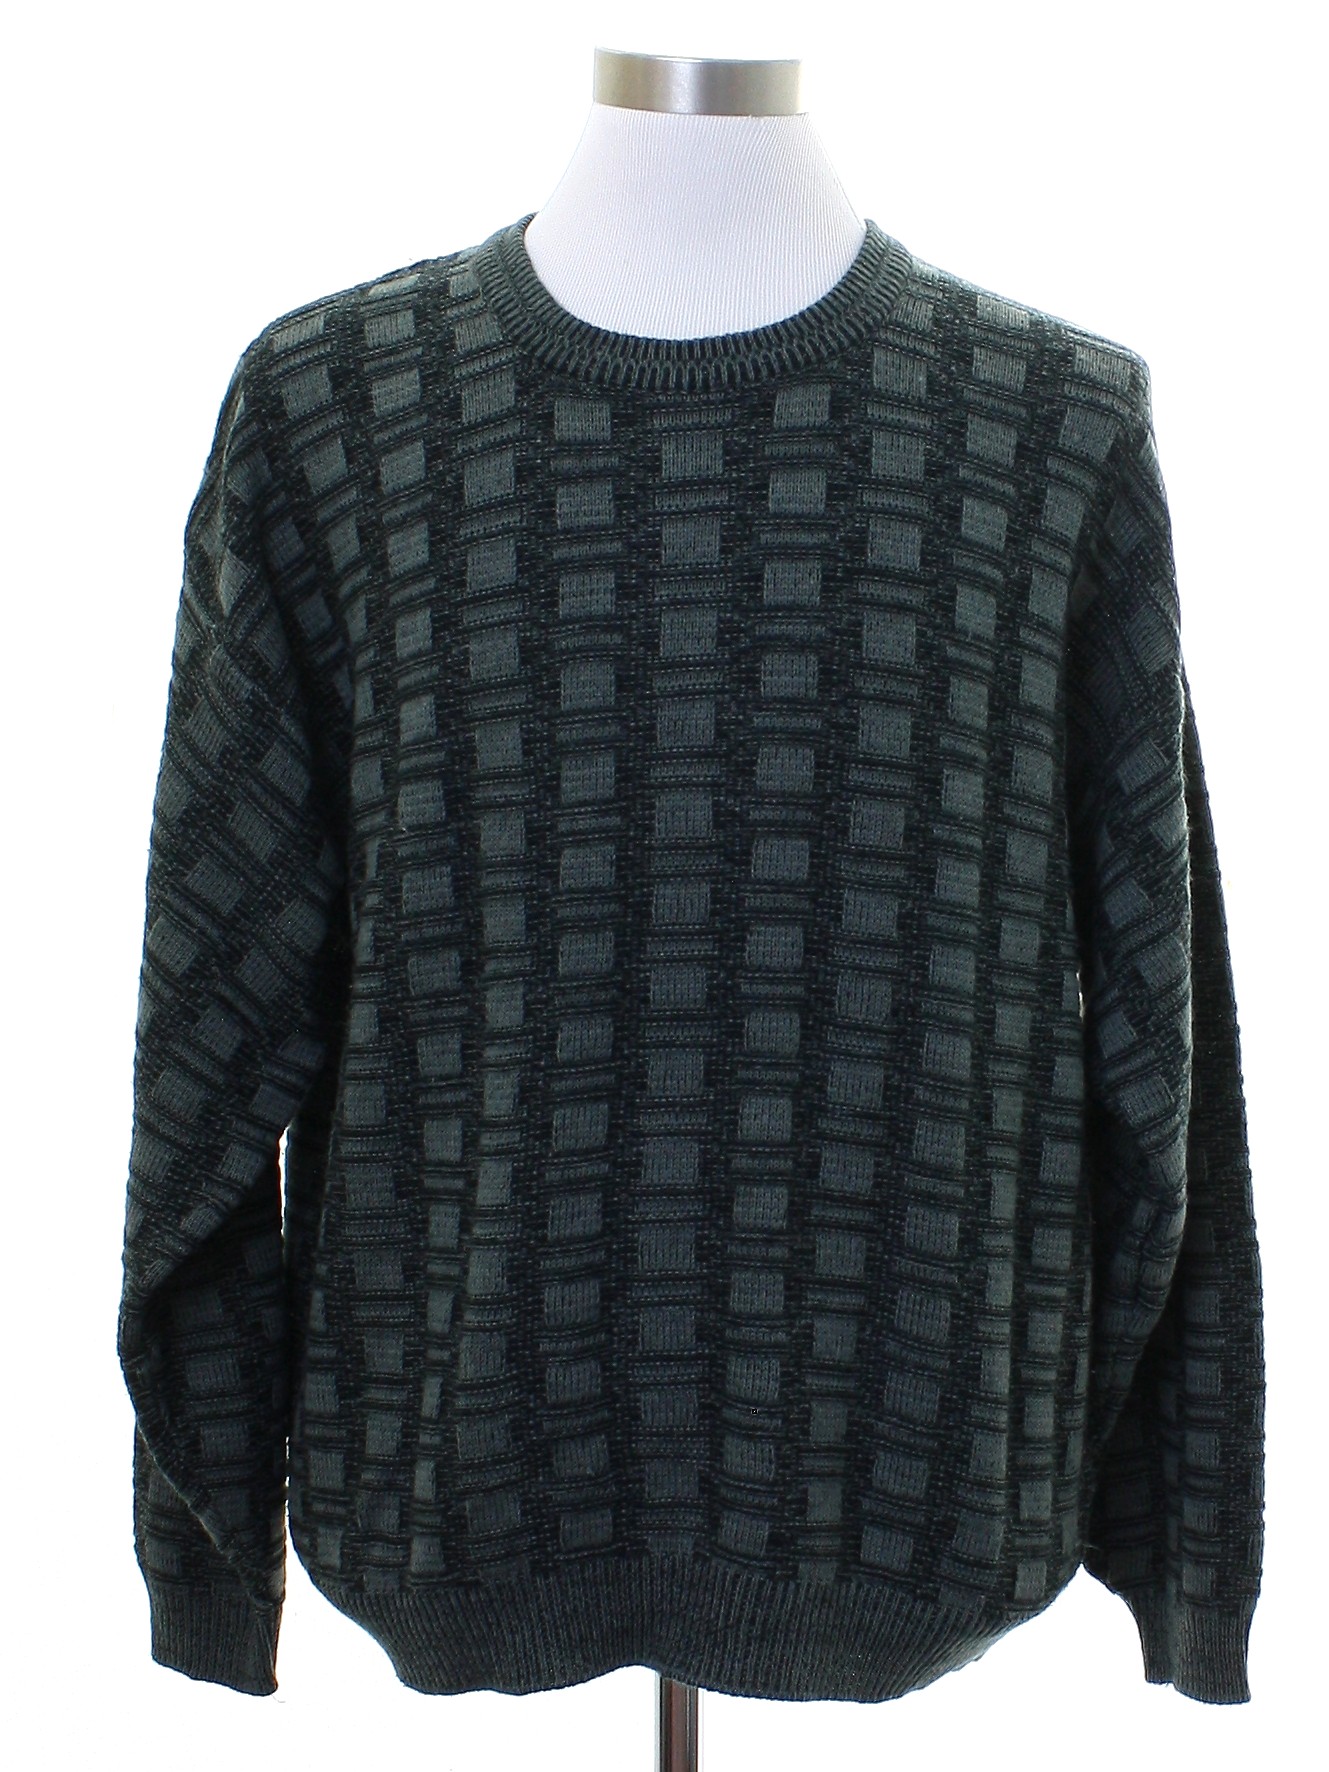 1980s Vintage Sweater: 80s -Expressions- Mens smoky gray background ...